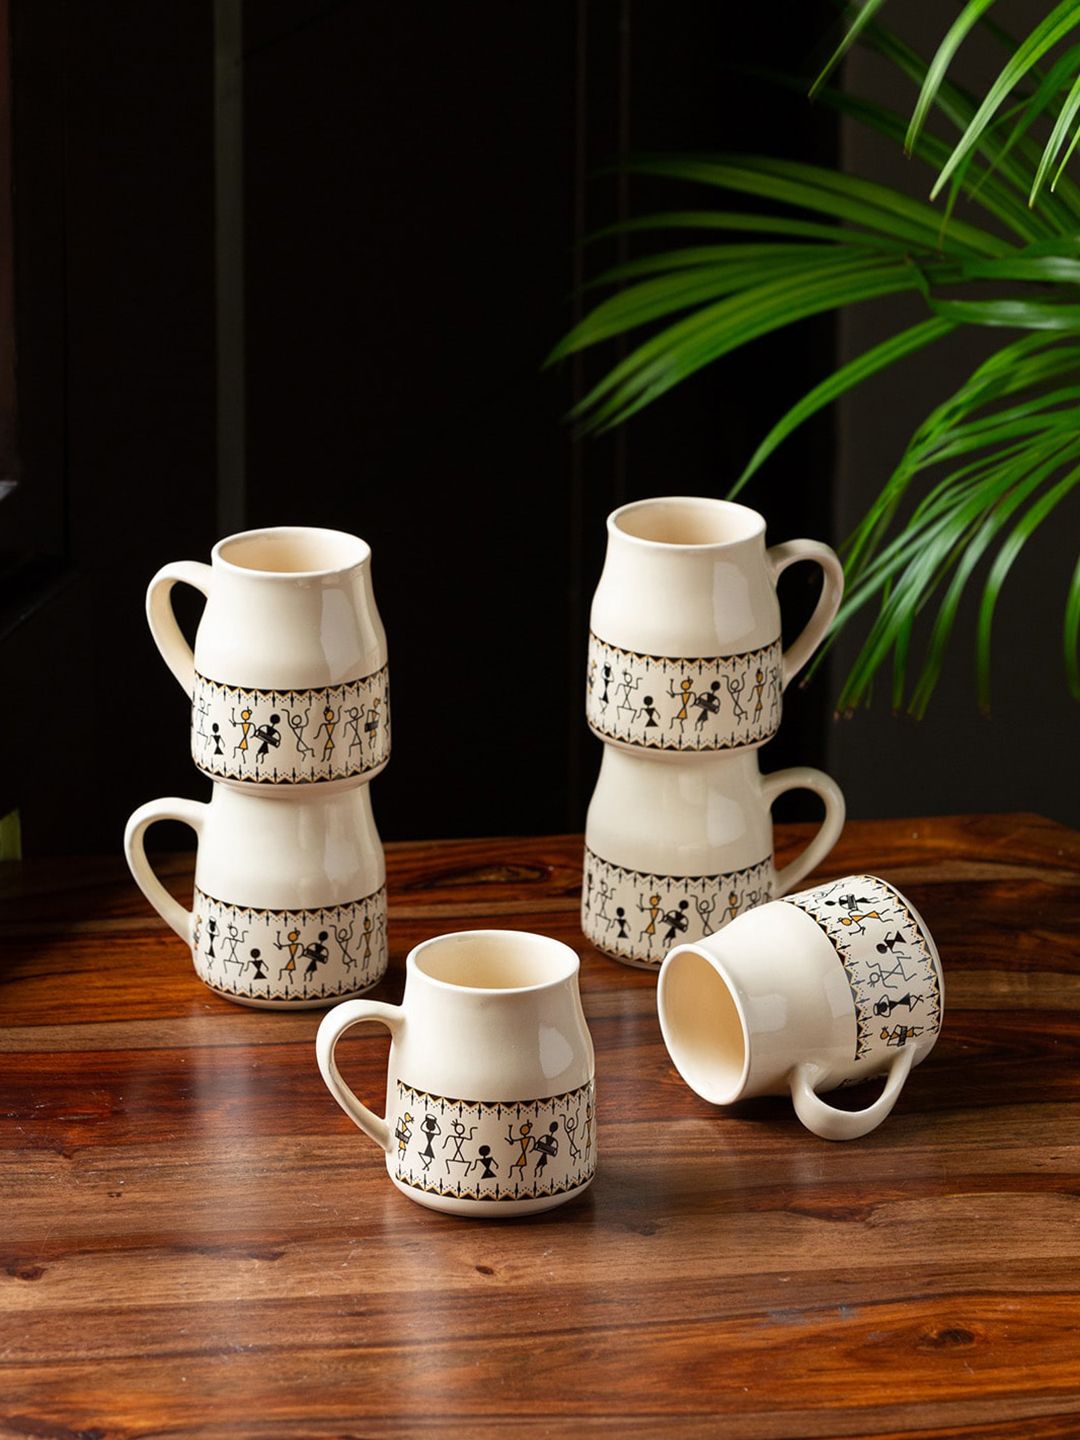 ExclusiveLane Set Of 6 White & Black Handcrafted Printed Ceramic Glossy Tea & Coffee Cups Price in India